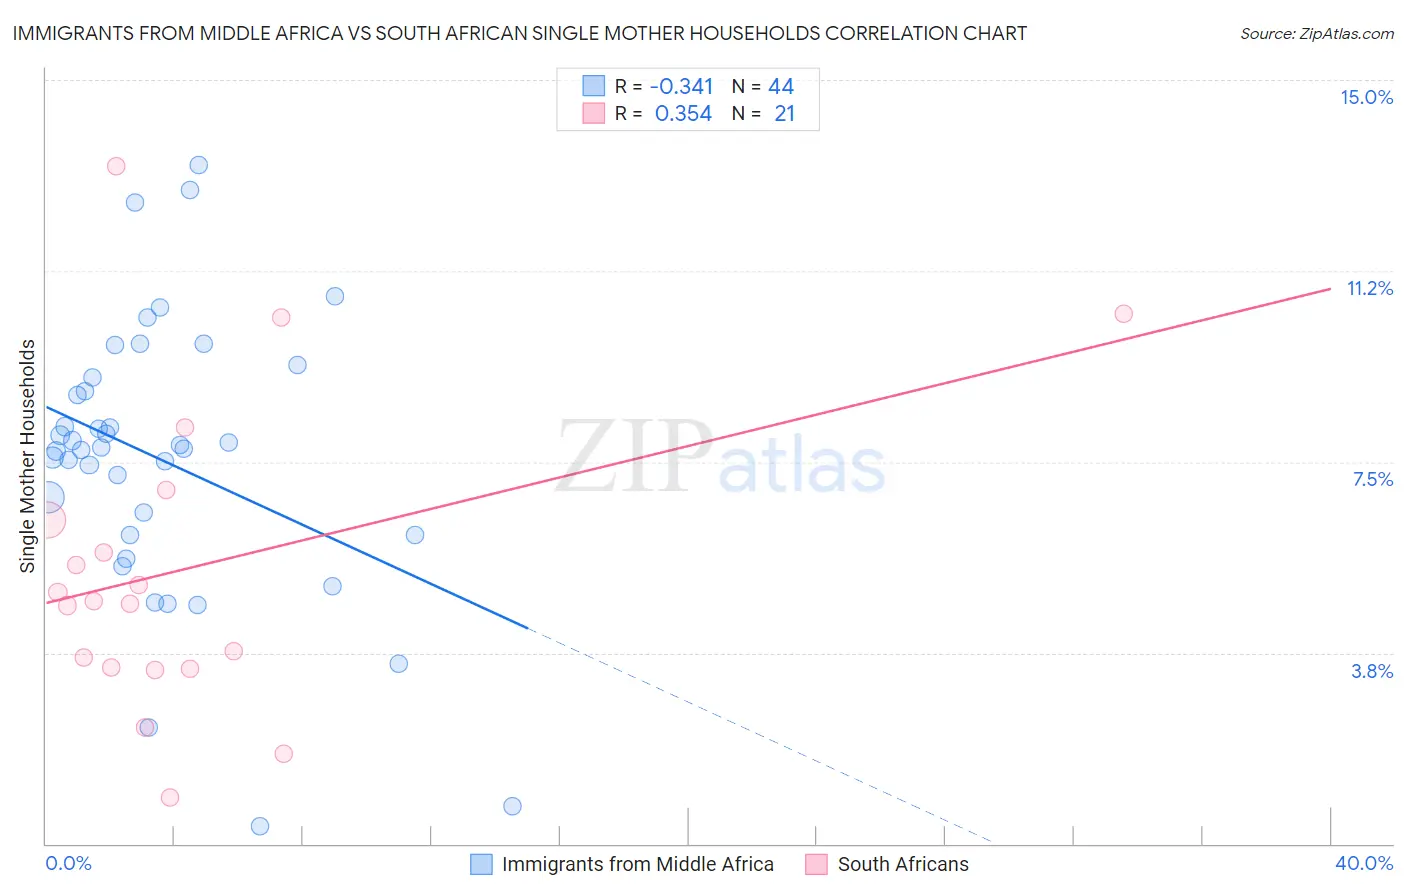 Immigrants from Middle Africa vs South African Single Mother Households